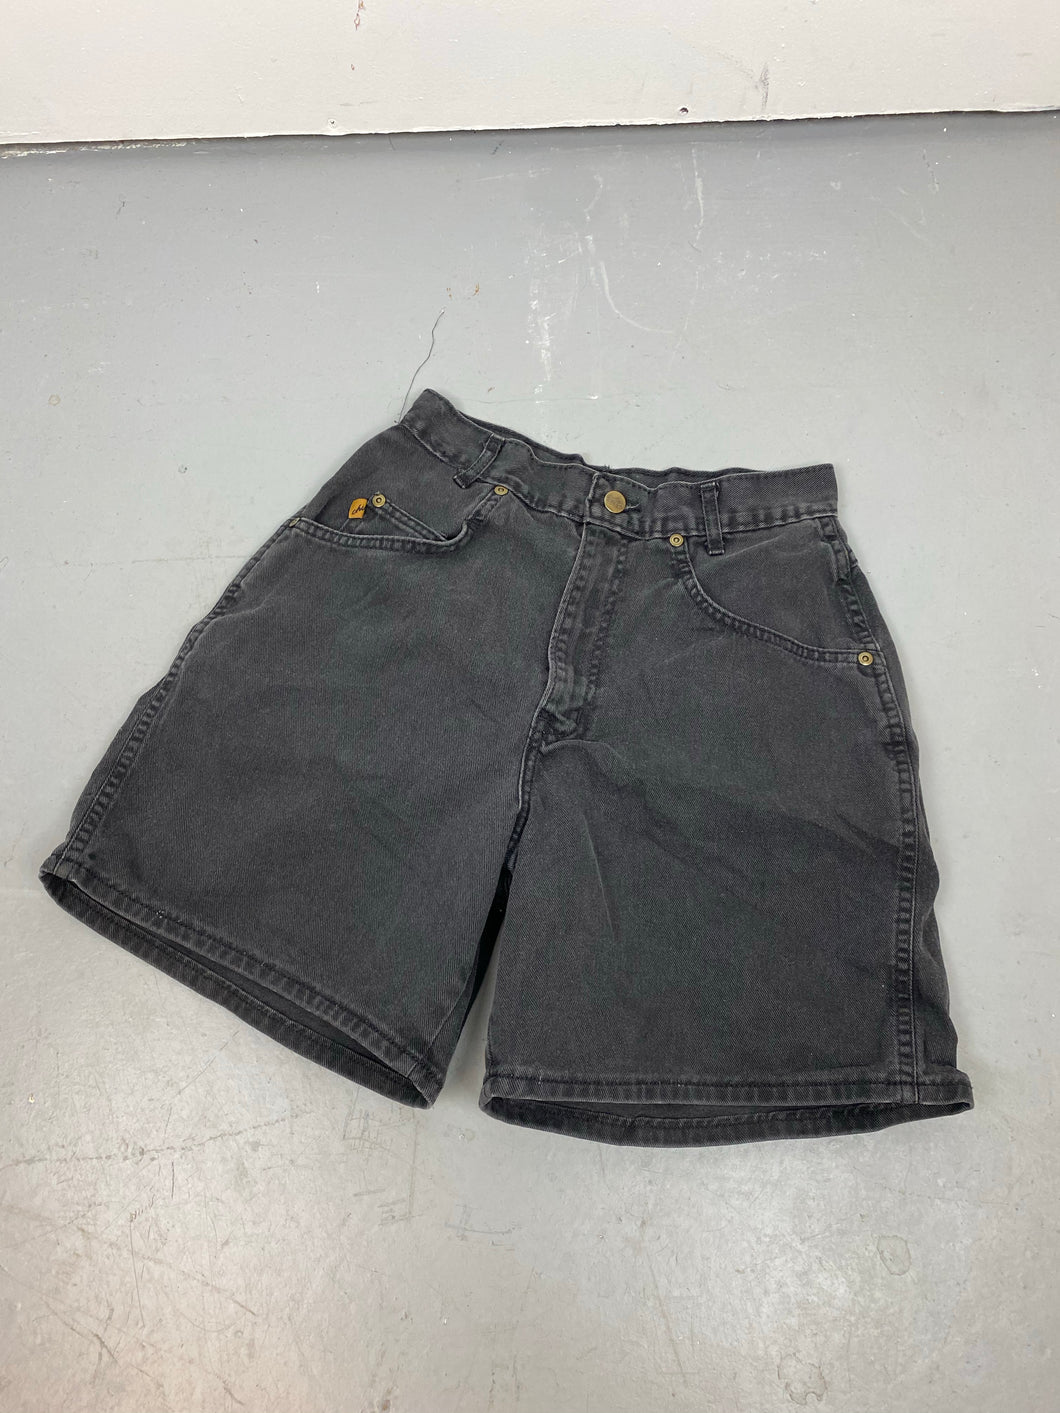 90s High Waisted Chic Denim shorts - 26in